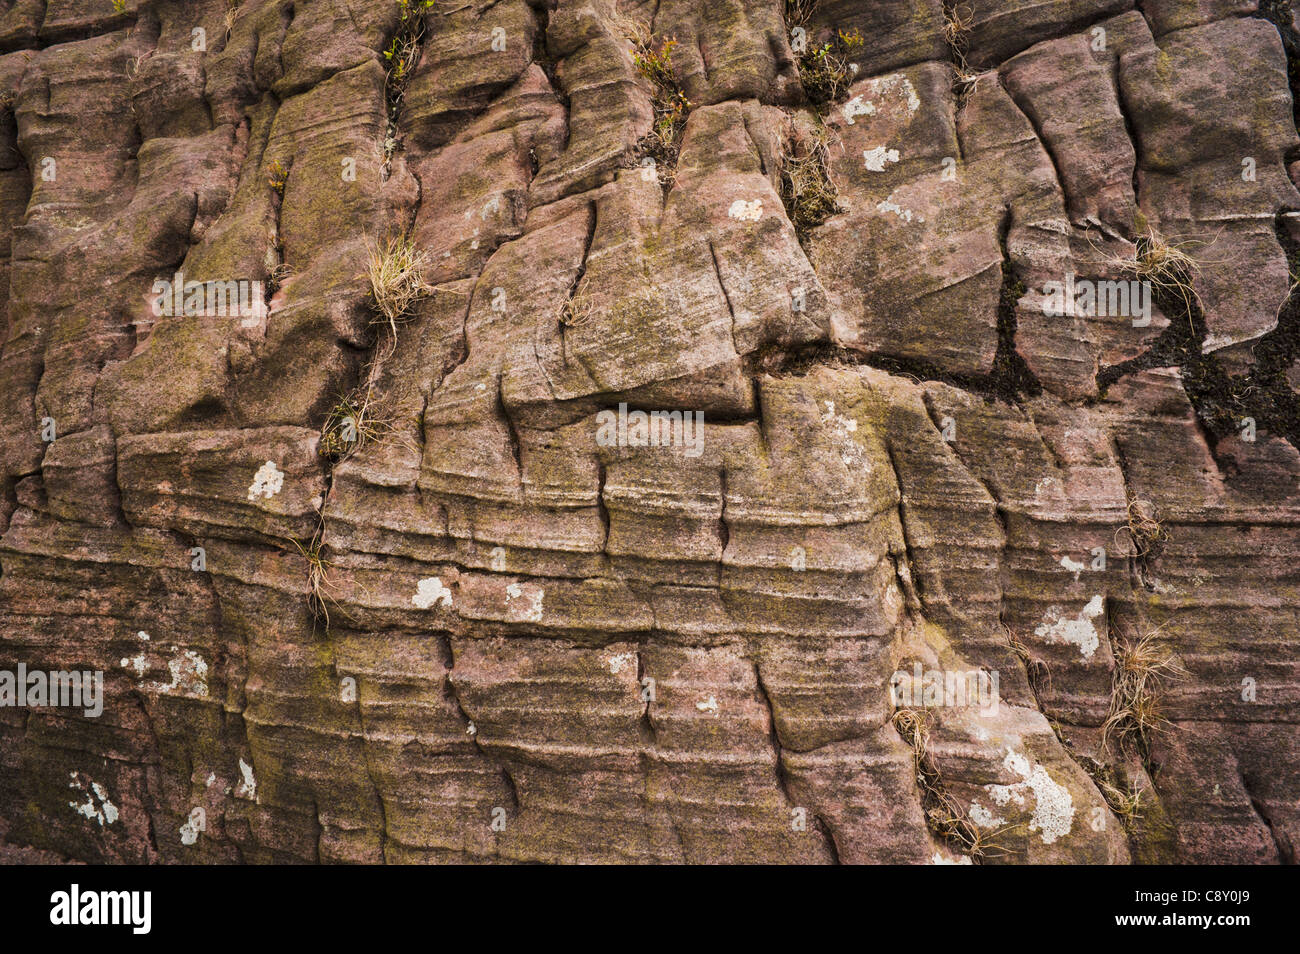 Cross bedding in Devonian sandstone, Galty Mountains, County Tipperary, Ireland Stock Photo